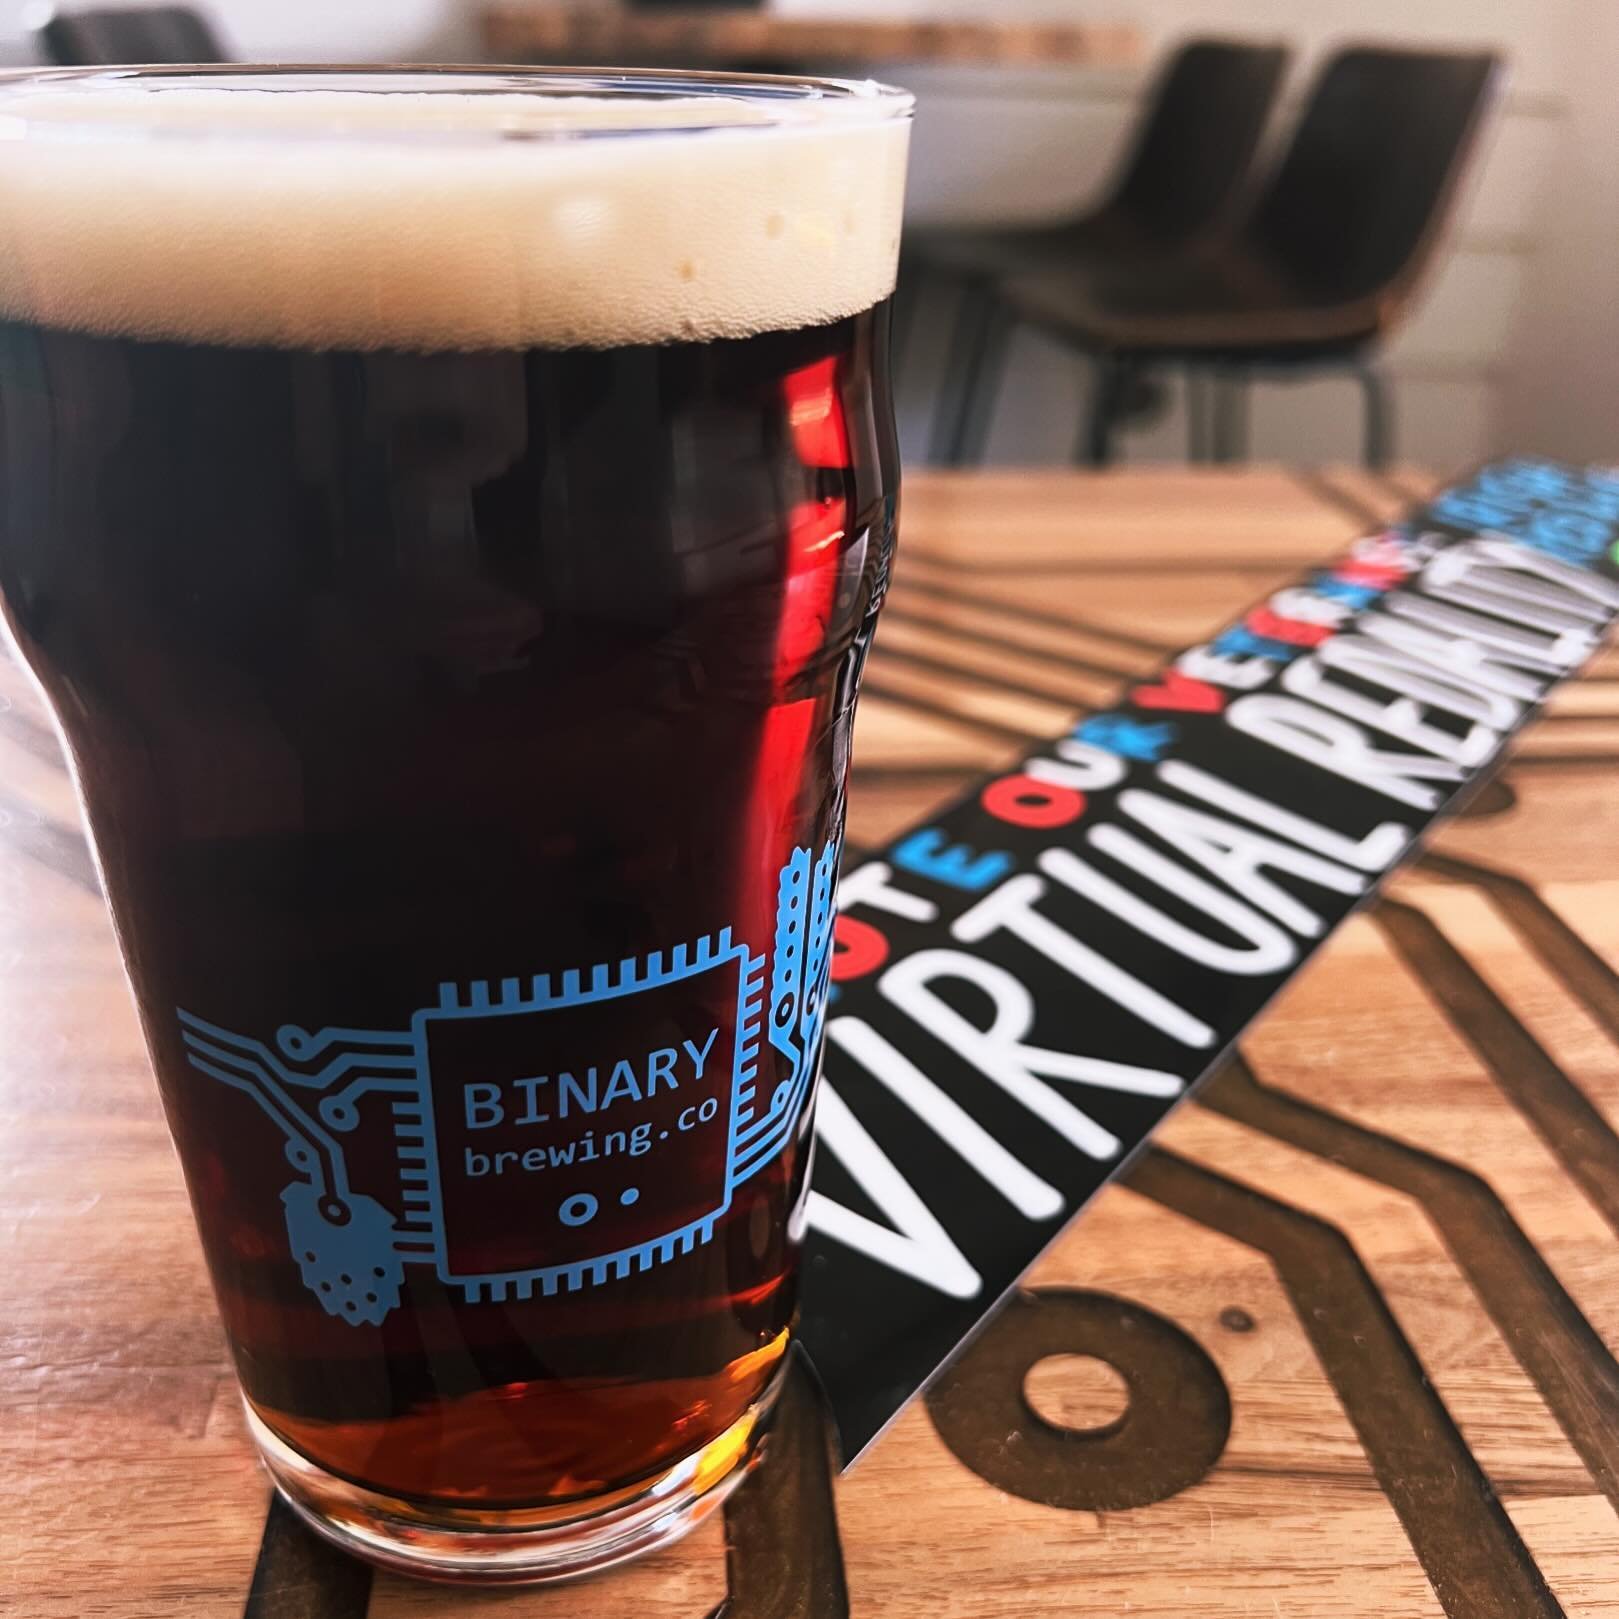 All month long we&rsquo;re teaming up with @salutevets to help support their Building Campaign! $1 of each pint of Virtual Redality will go back to their mission of employing and supporting veterans in our community!